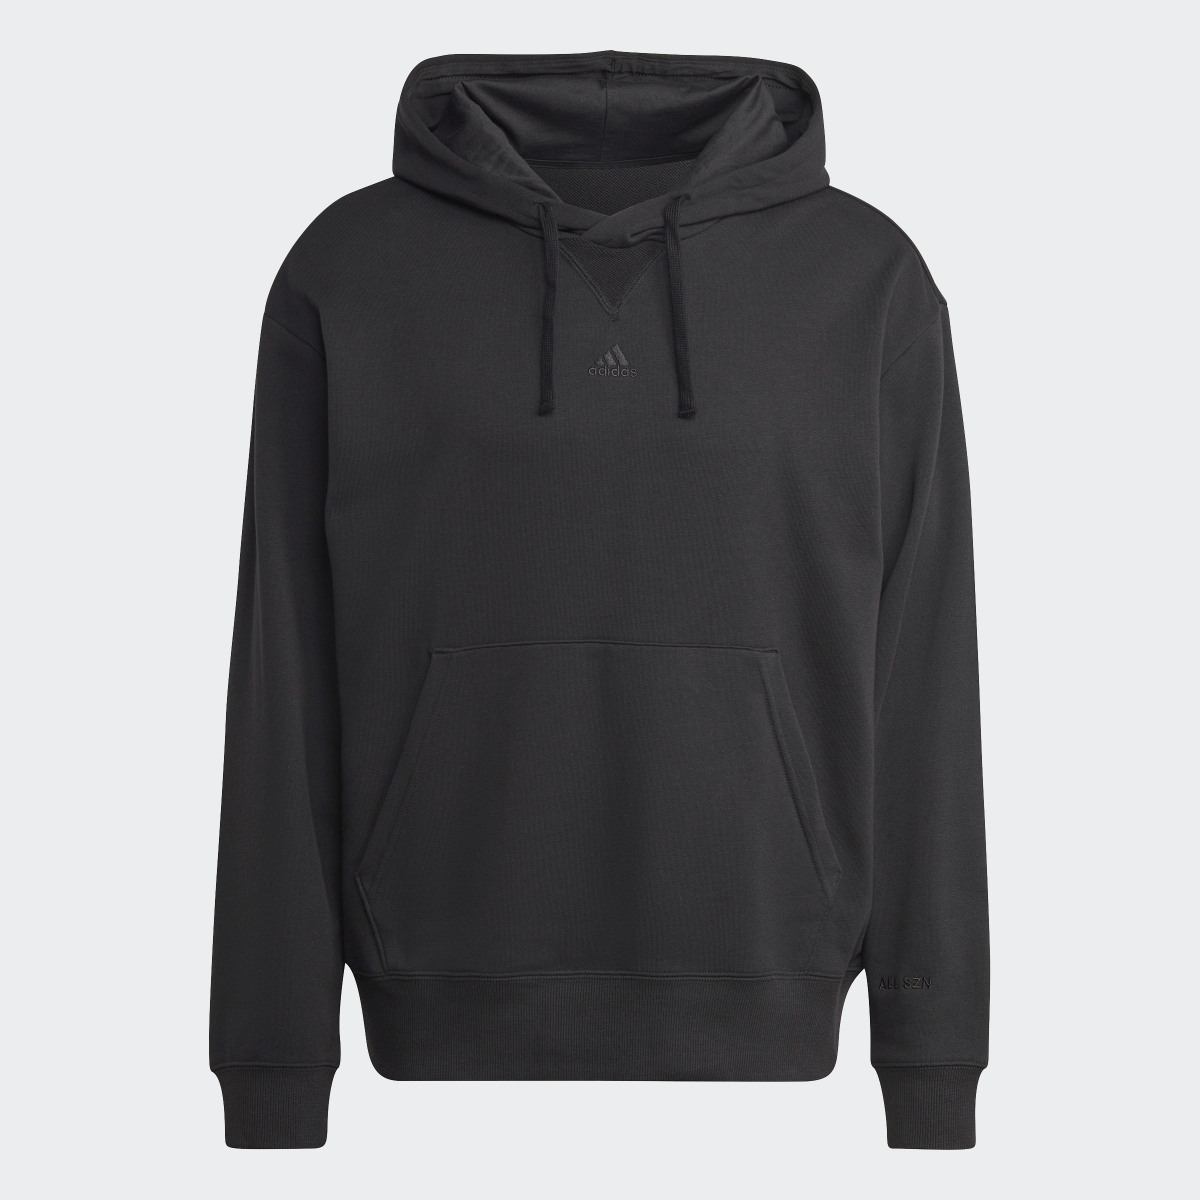 Adidas ALL SZN French Terry Hoodie. 6